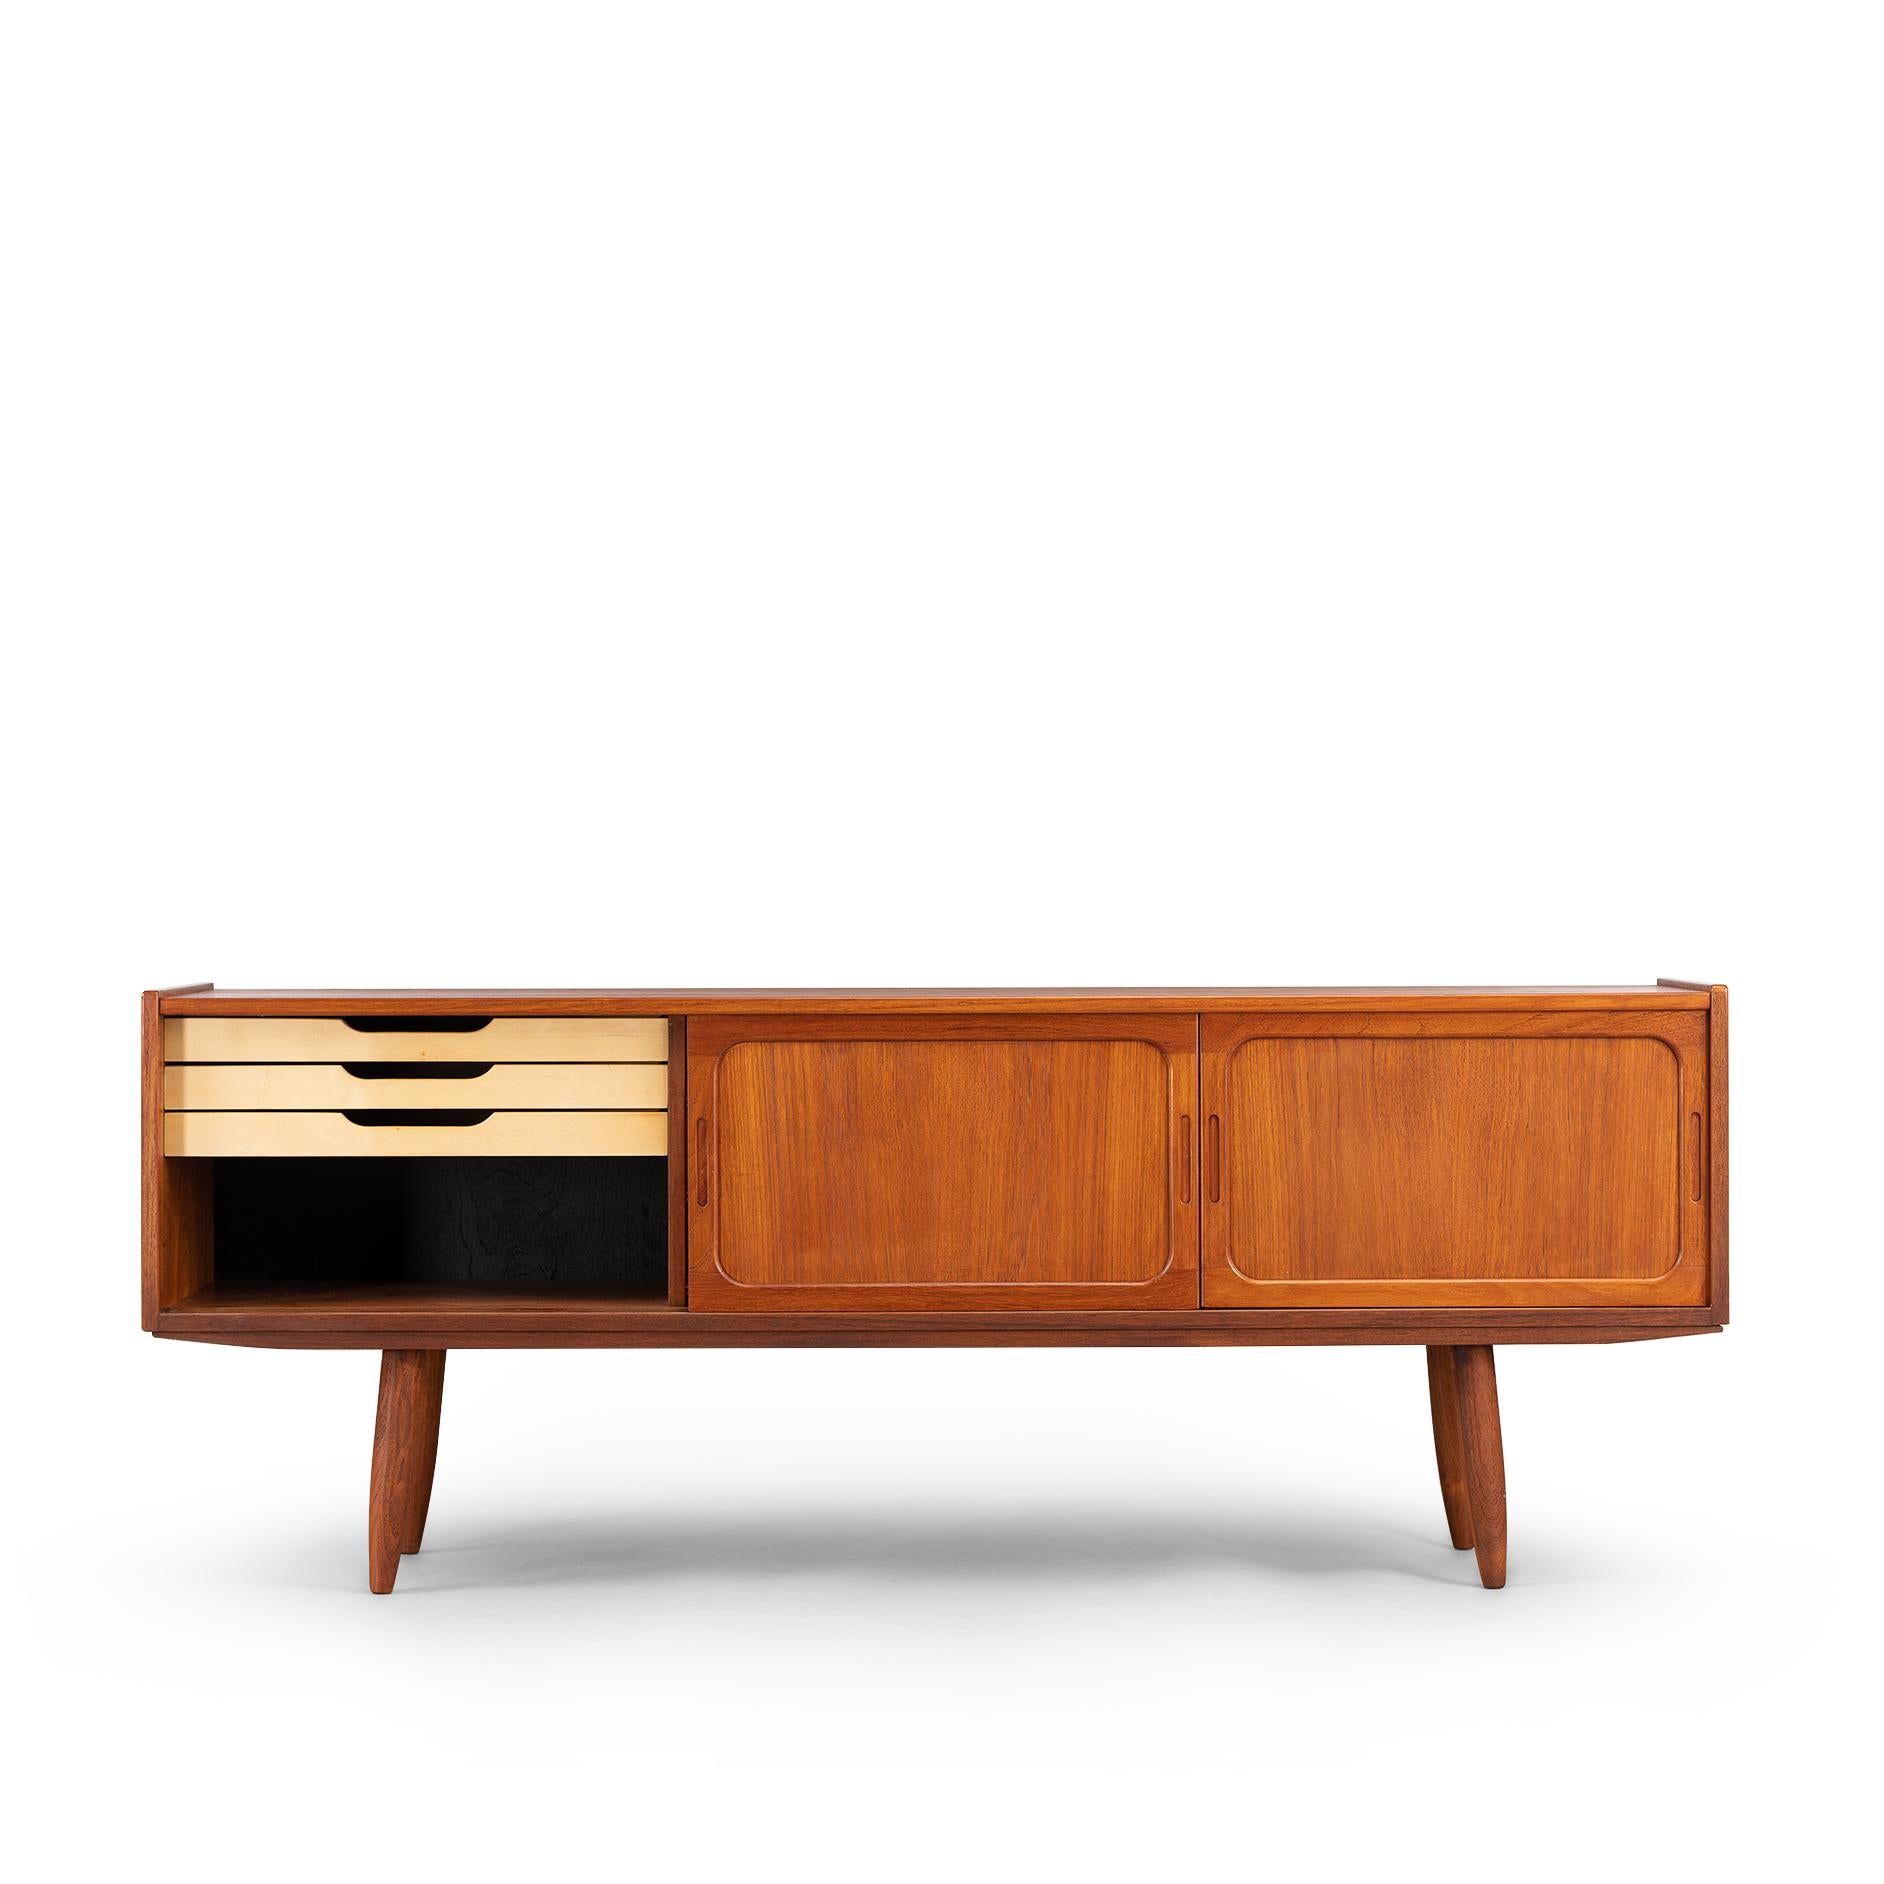 Low sideboard in teak in which you can hide all your pleasures. The color is a beautiful reddish dark brown. The cool grips, framed sliding doors and patterning of the wood make this one a true eyecatcher. On the inside there is all you need with a